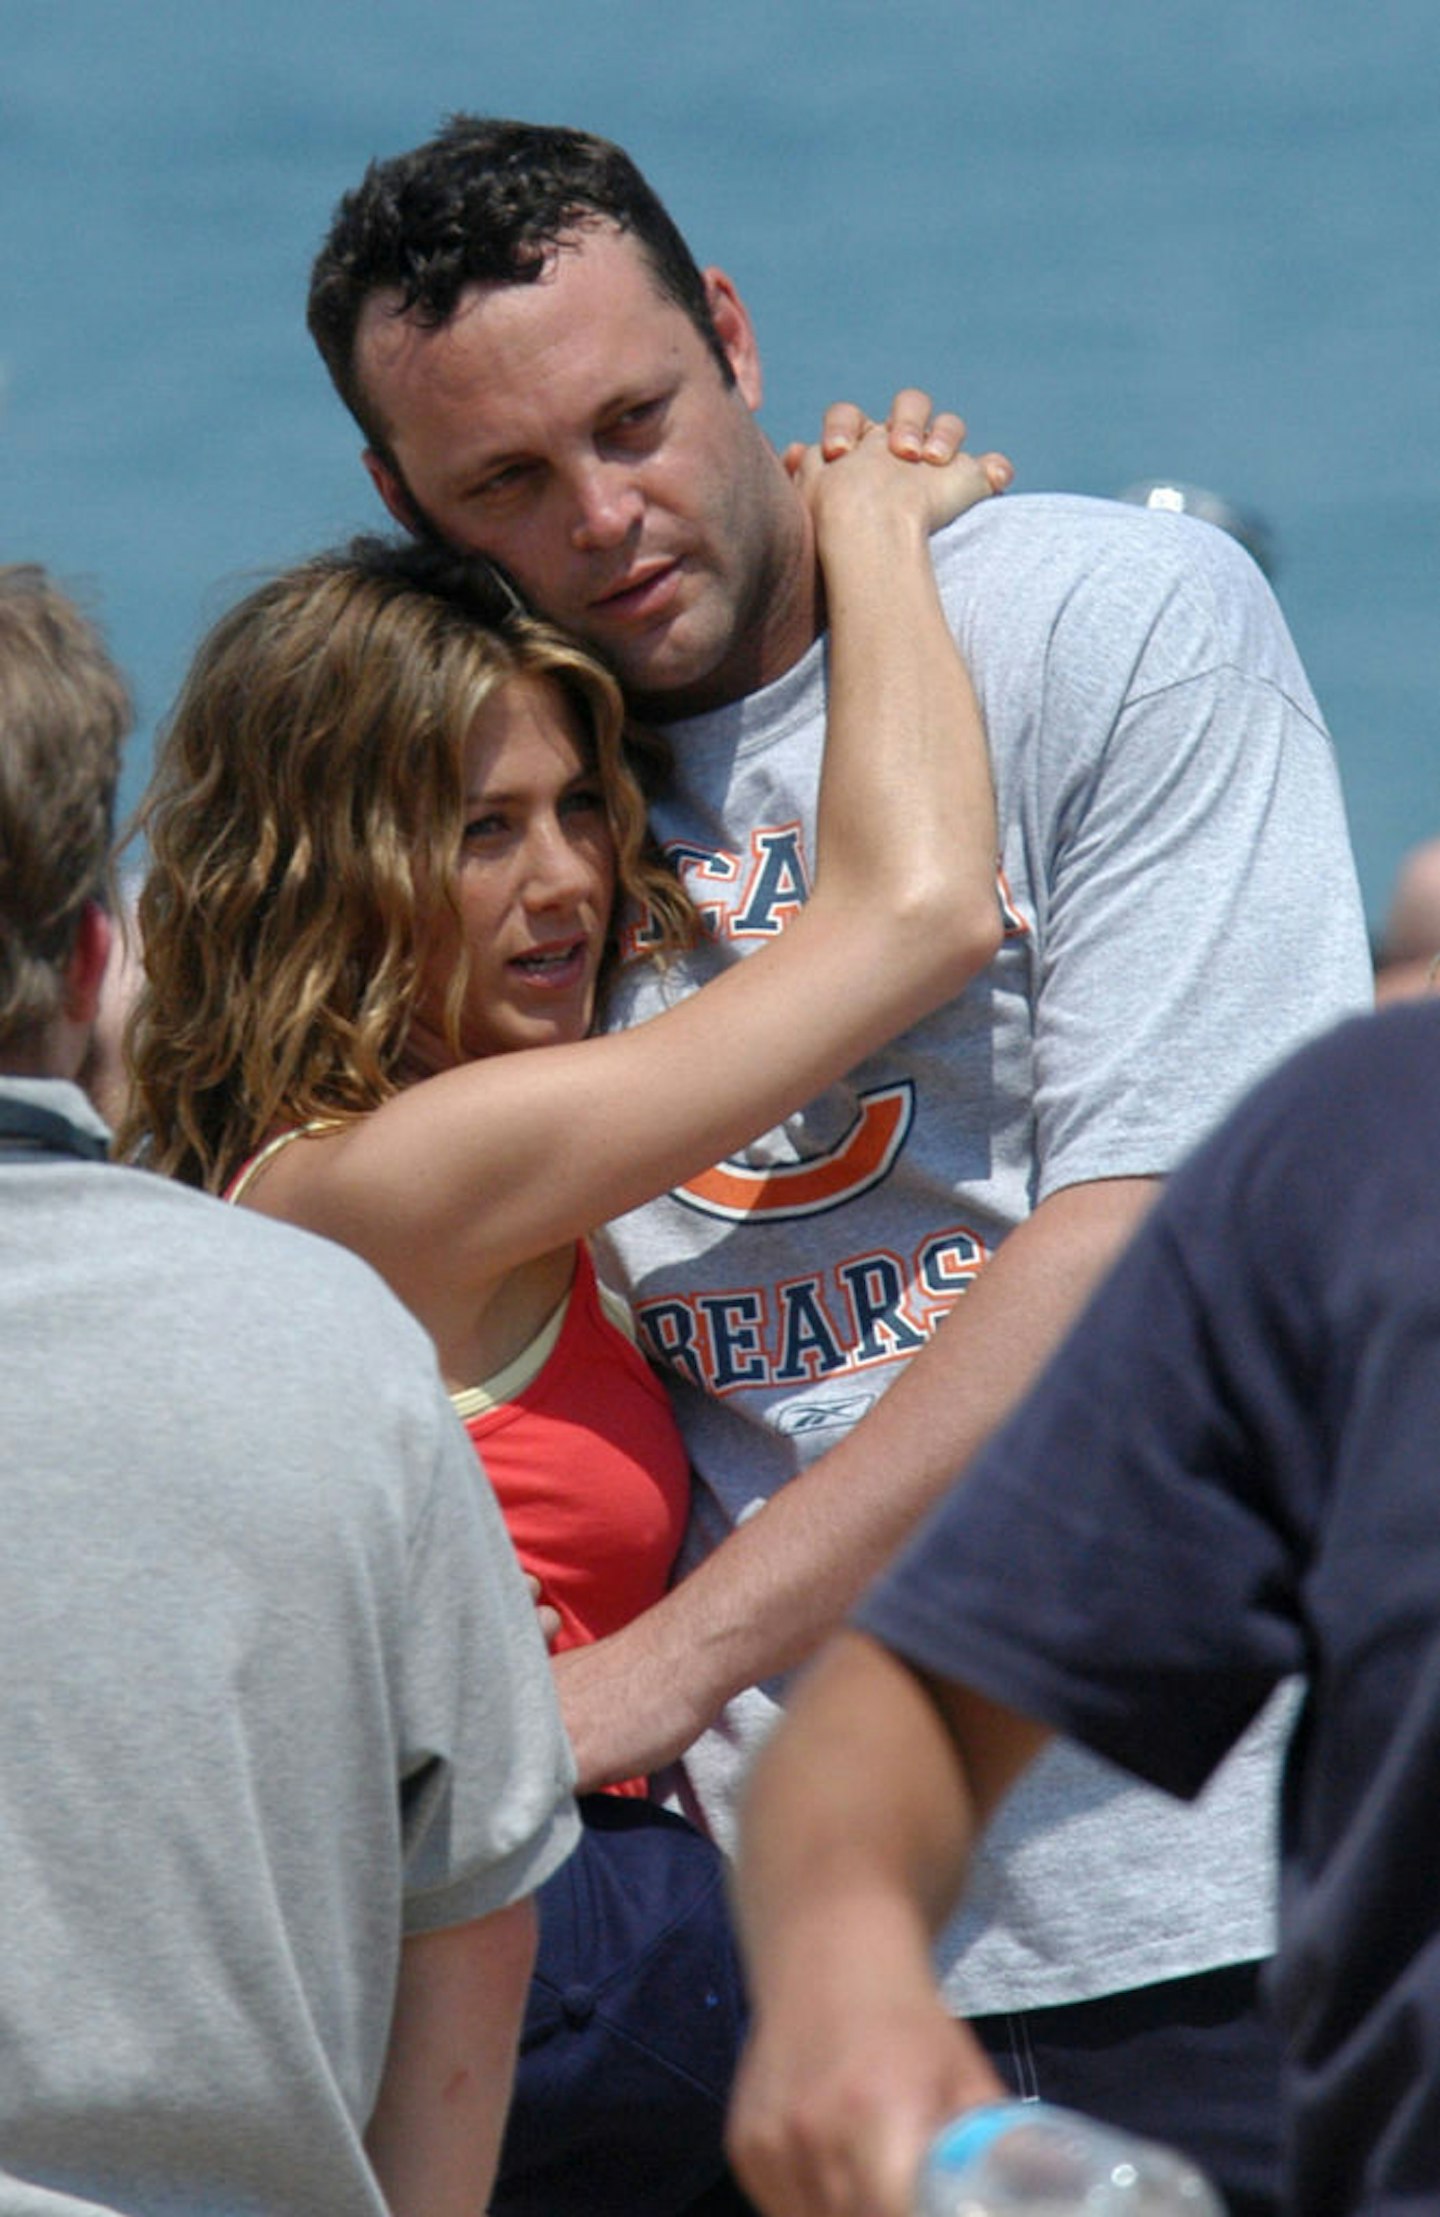 Jennifer Aniston and Vince Vaughn in 2005